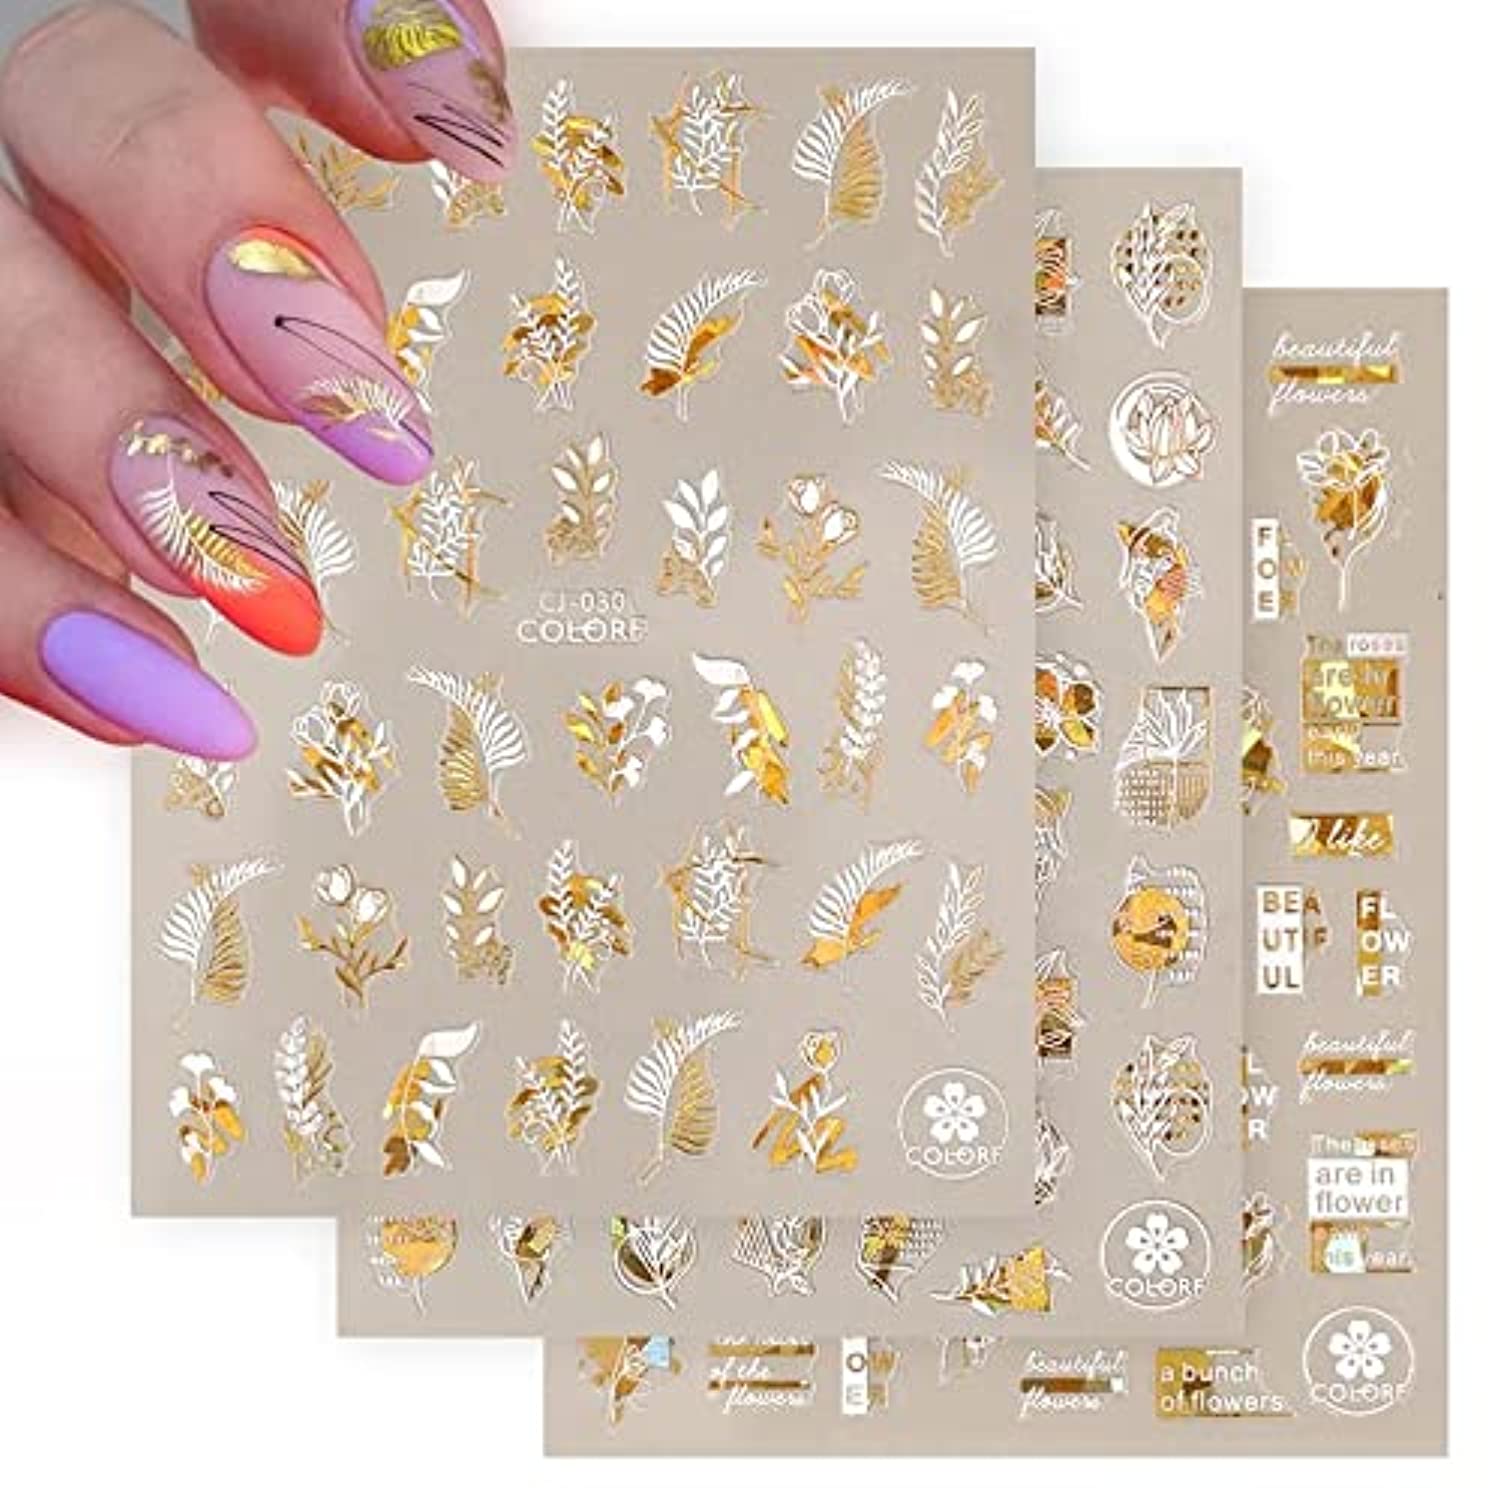 Flower Nail Stickers Holographic Gold White Nail Art Stickers 3D Laser Flowers Leaf Abstract Face Design Nail Decals for Nail Art DIY Acrylic Nail Decorations Manicure Decals for Women Girls 6Sheets